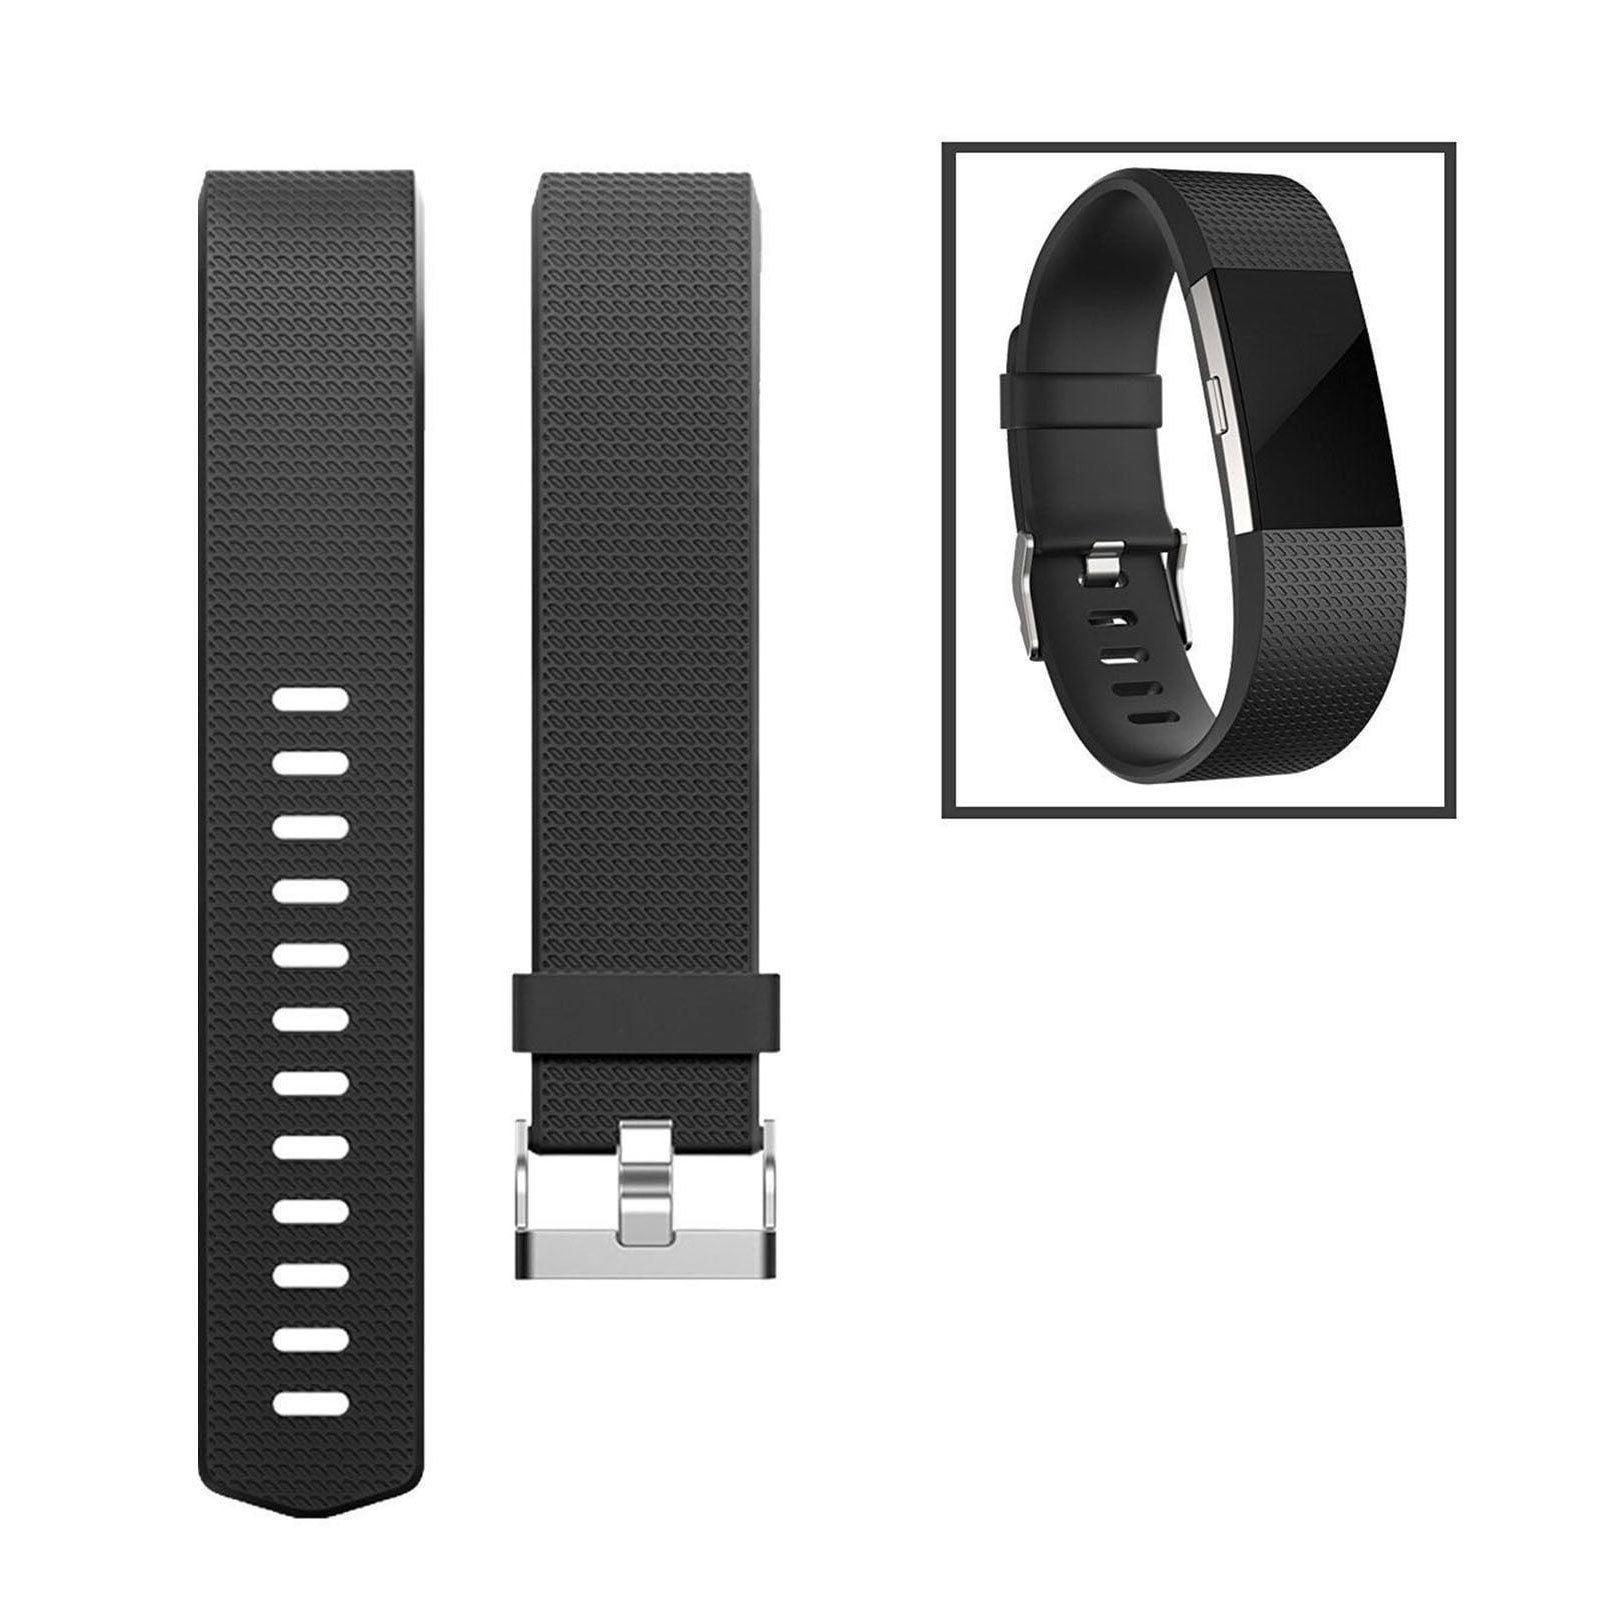 Details about   Buy 2 get 1 FREE "Butterfly"  charm fitbit flex Charge HR 2 Alta 